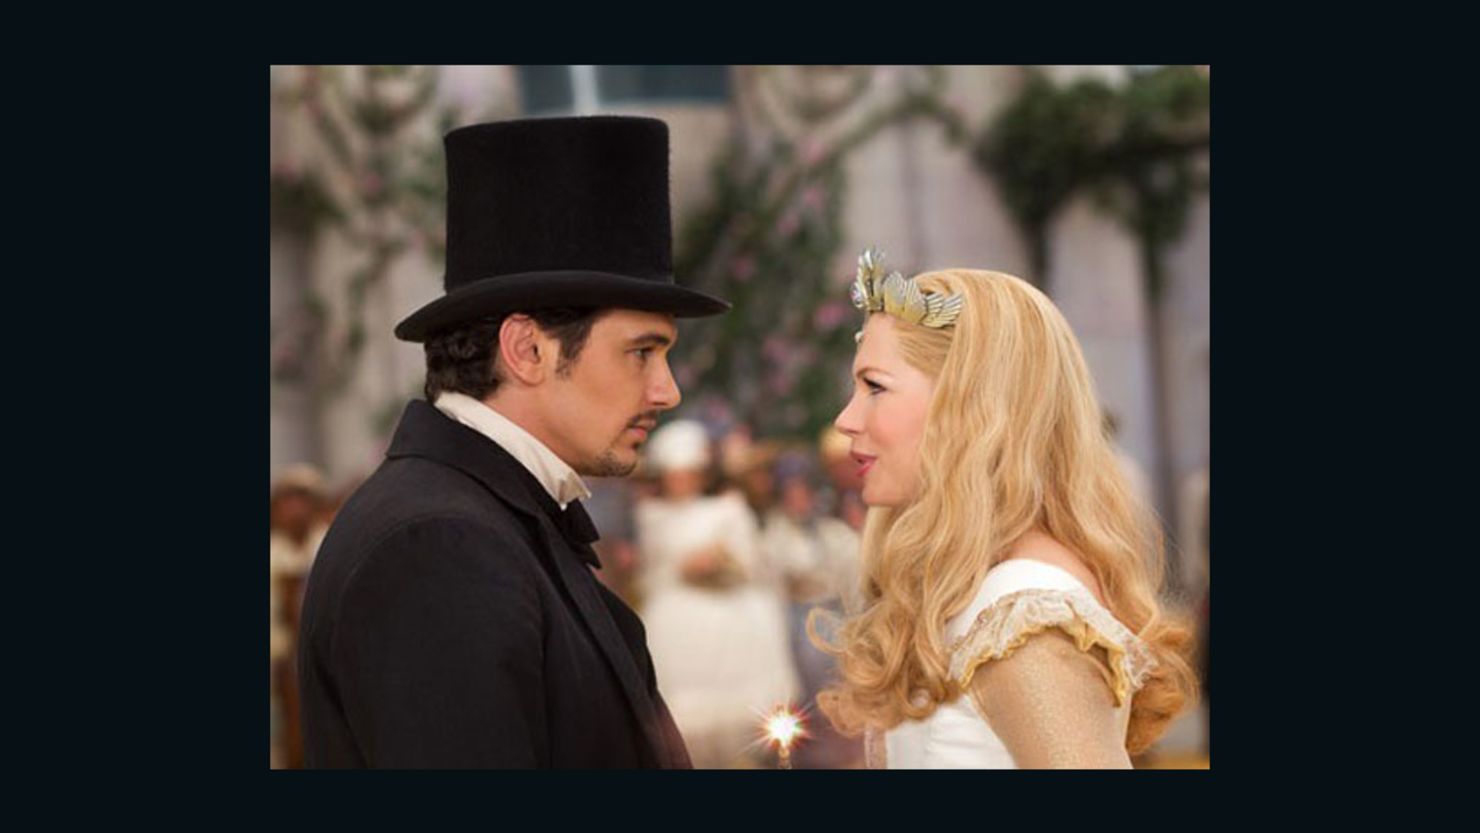 James Franco and Michelle Williams star in "Oz the Great and Powerful."